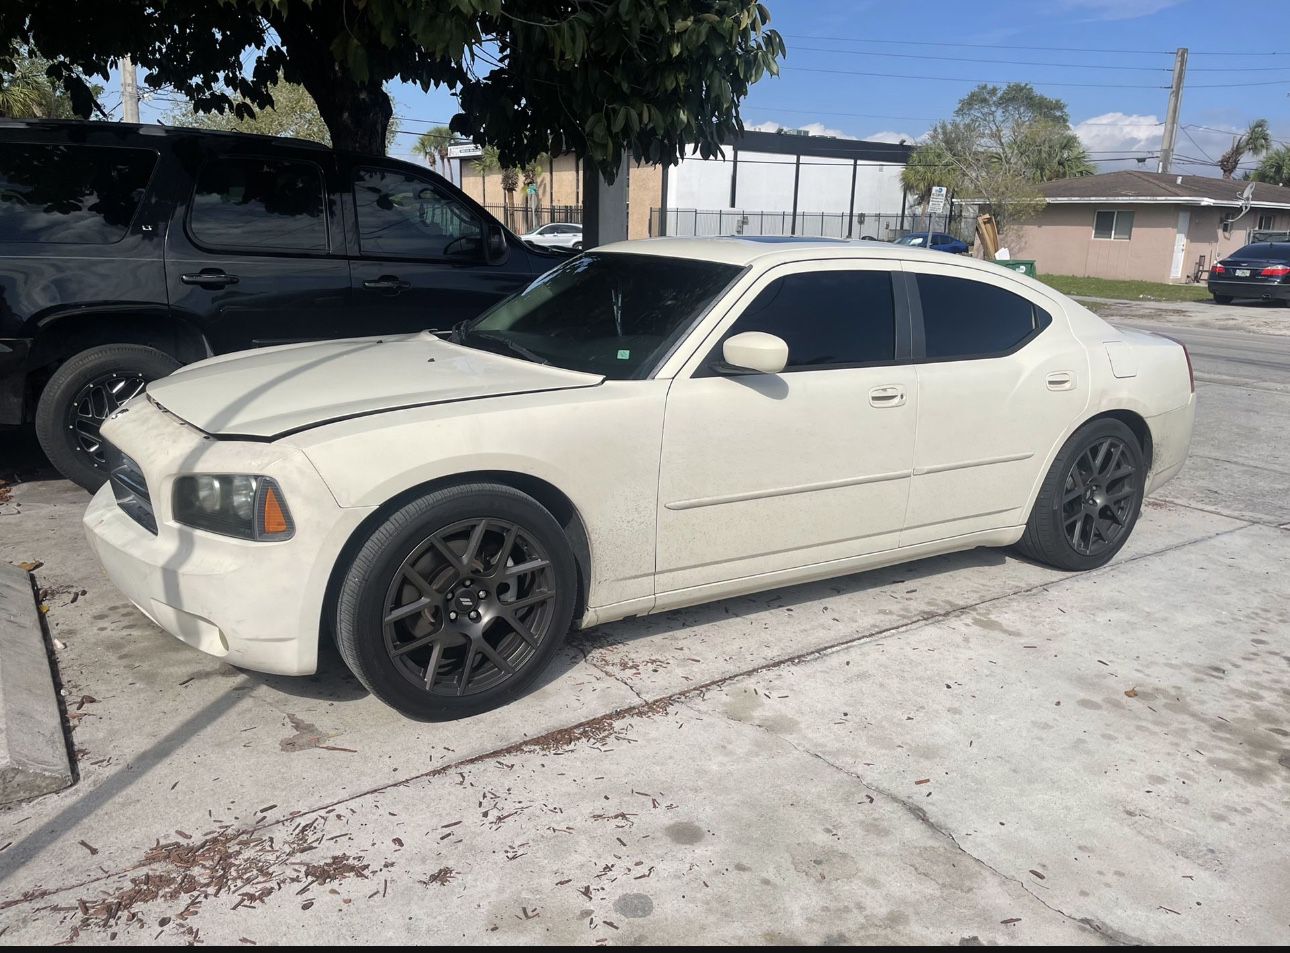 Charger Parts For Sale